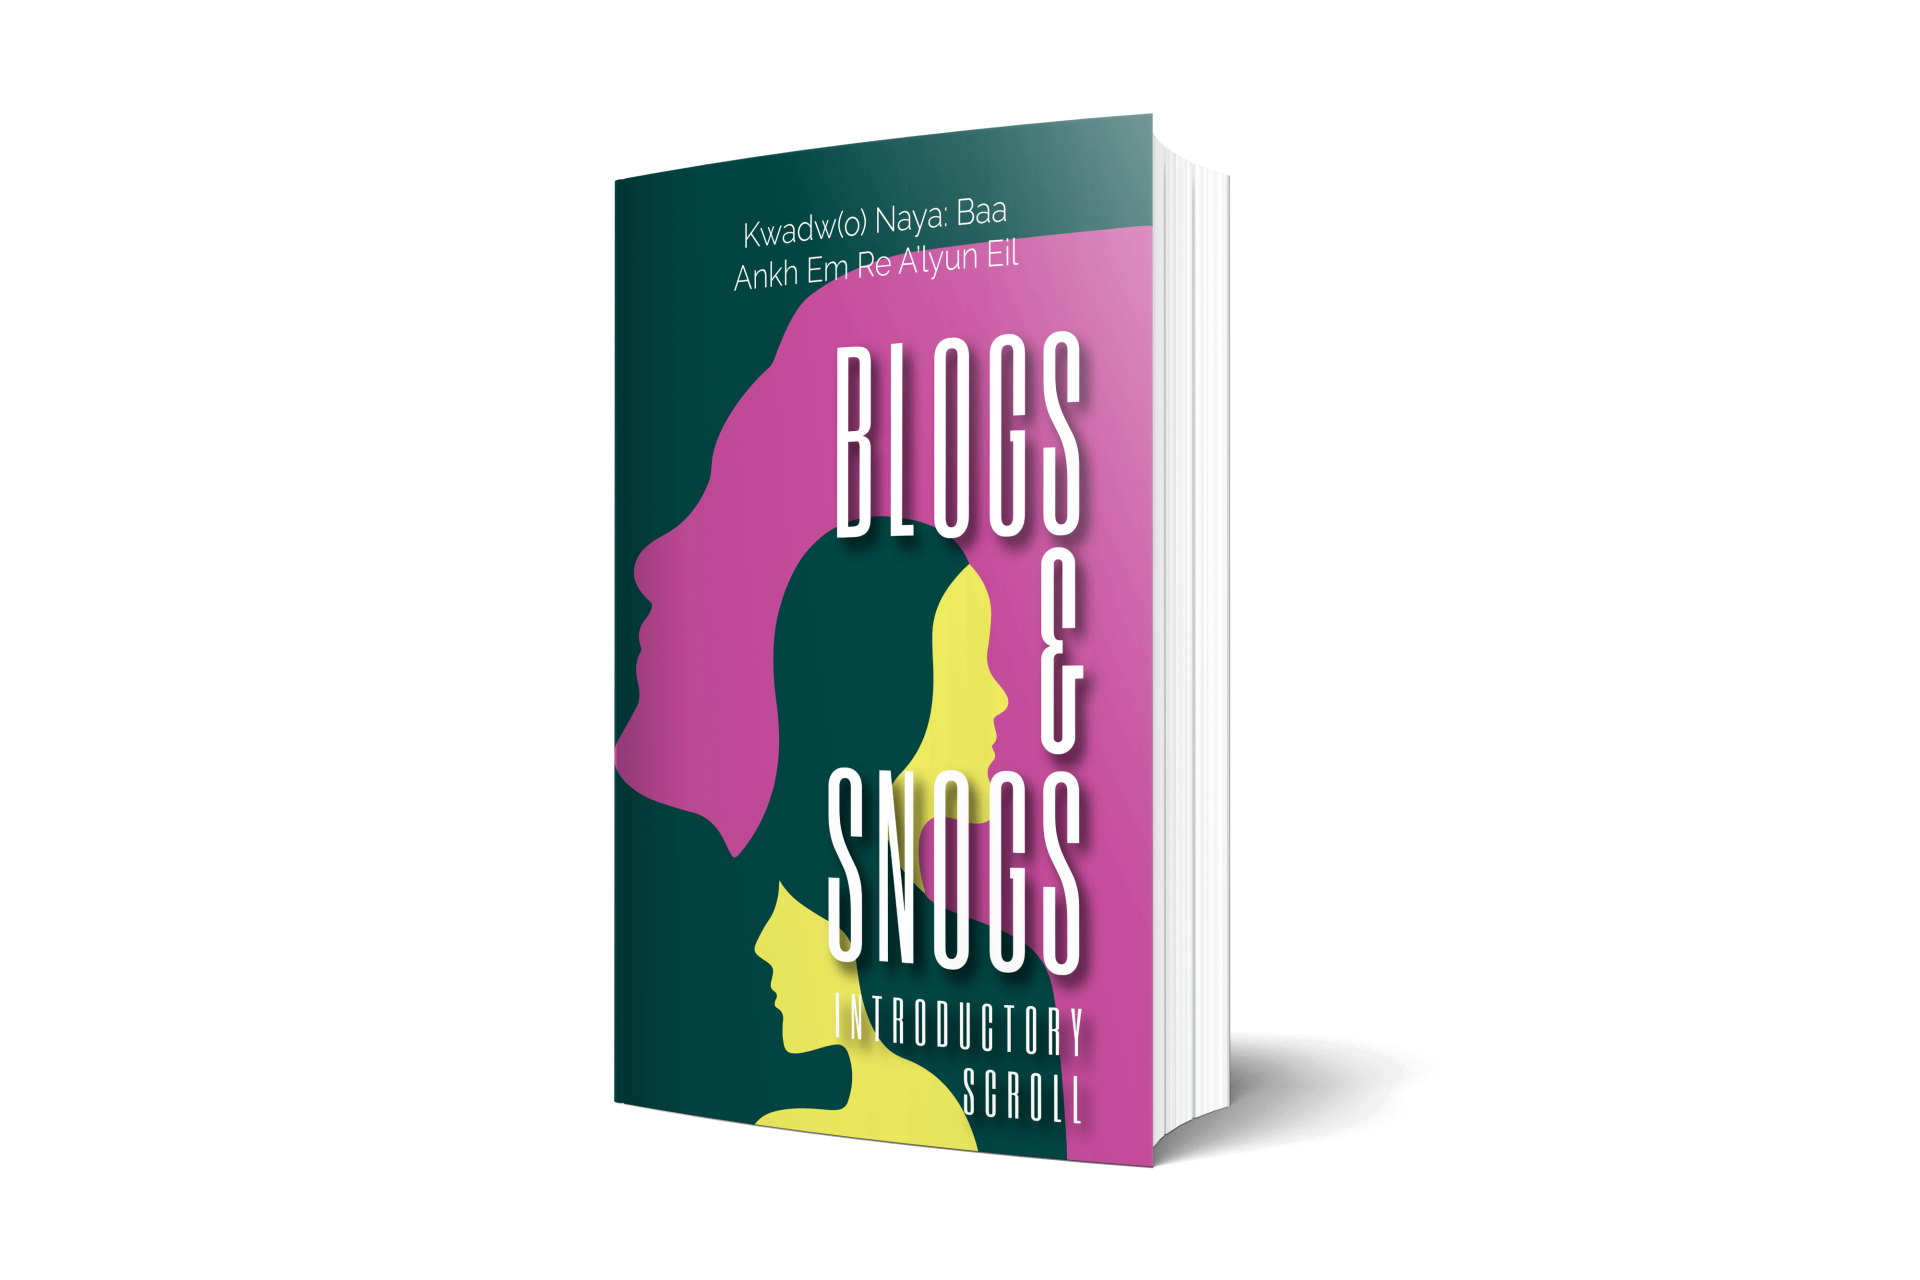 Blogs & Snogs! Introduction Scroll download